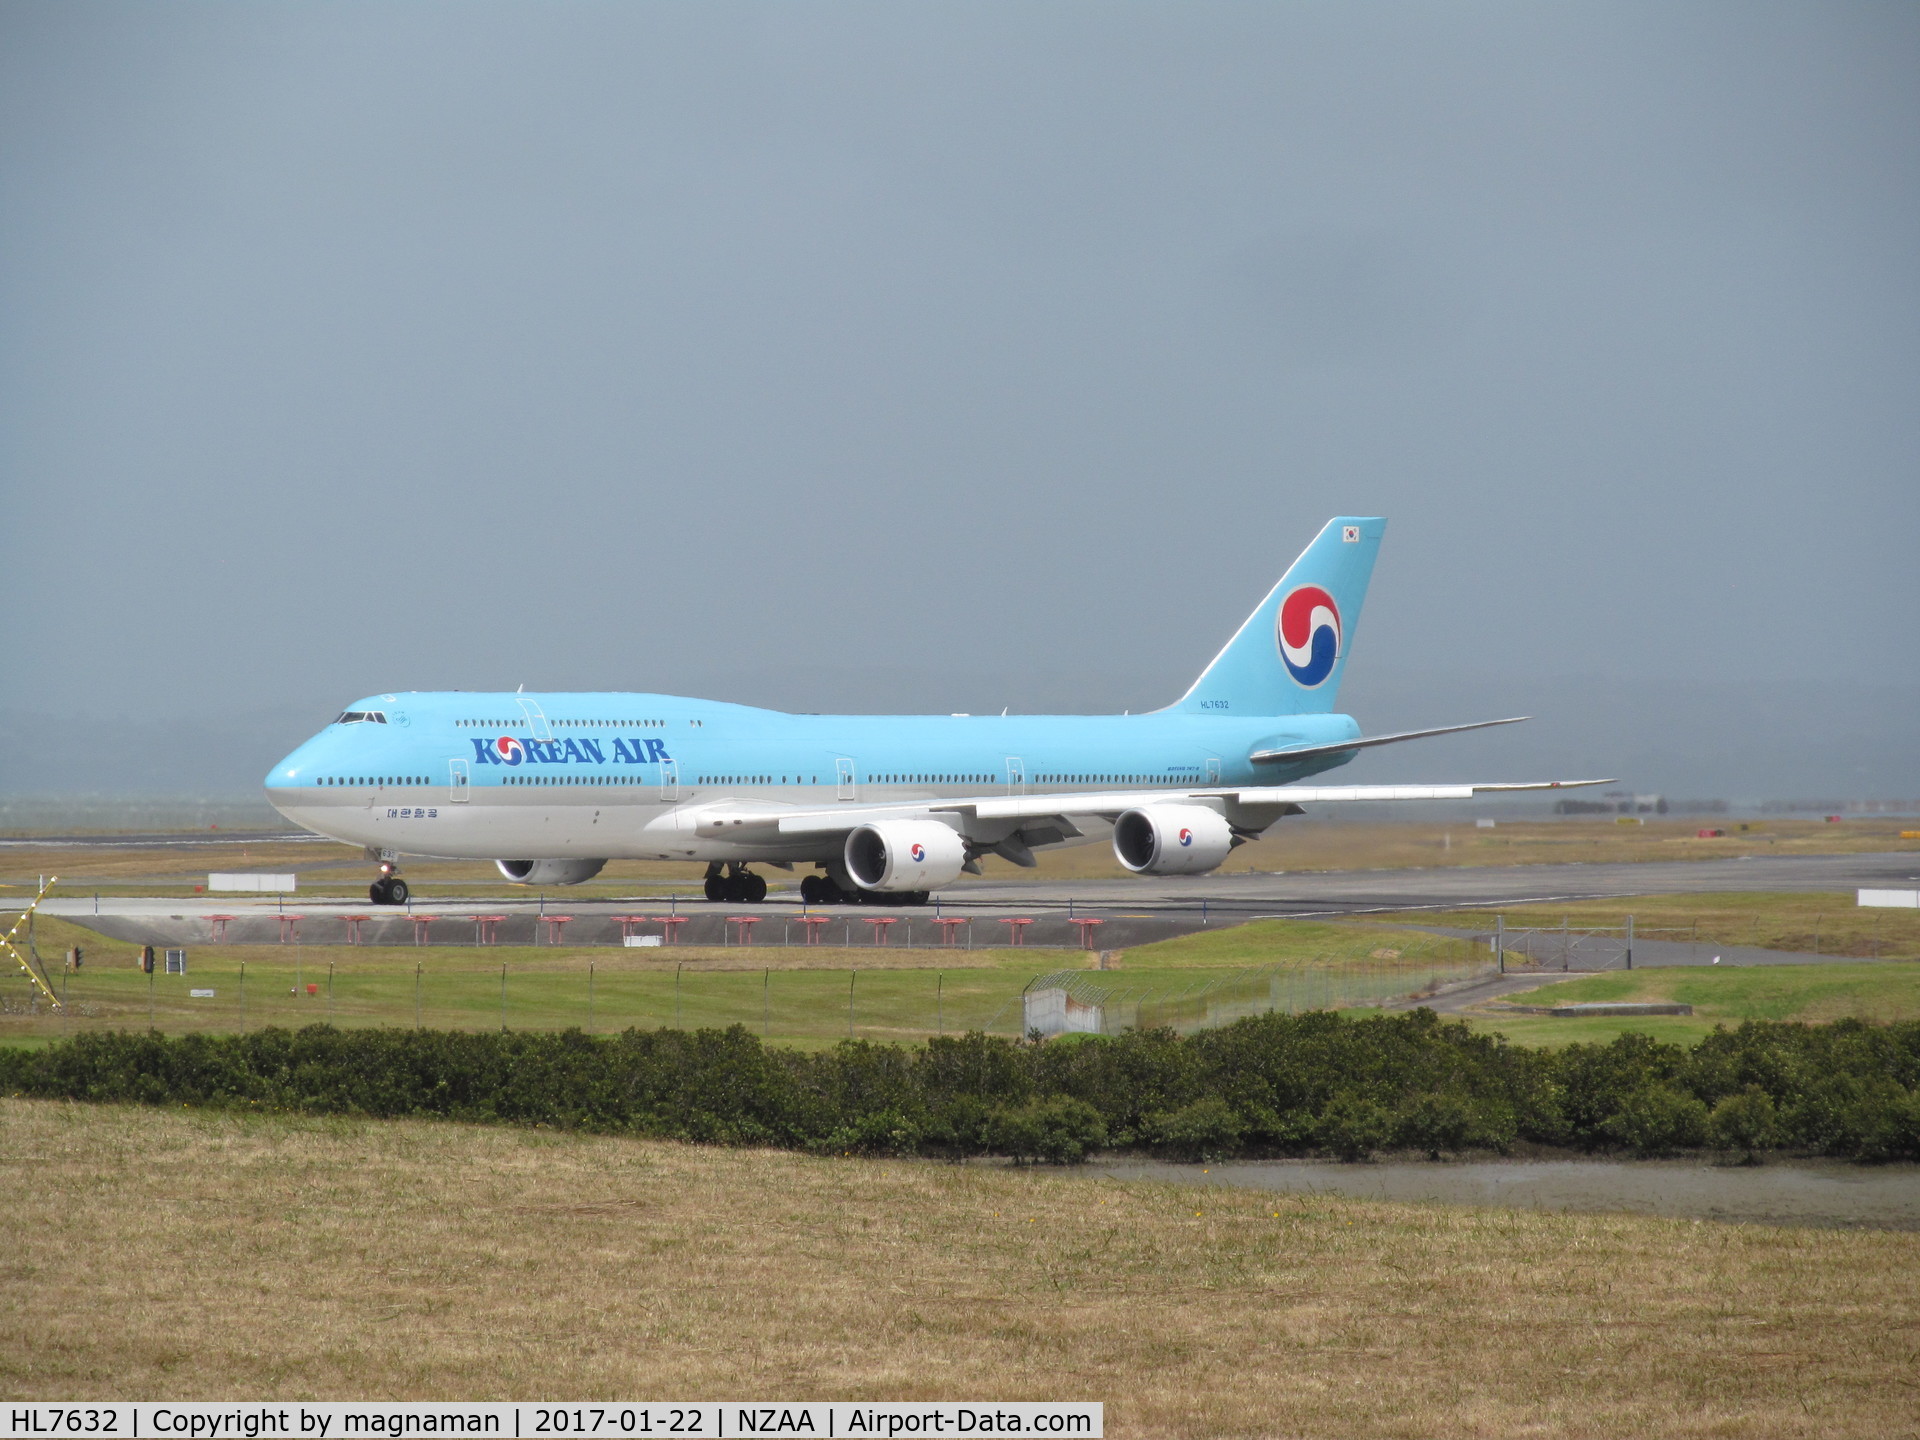 HL7632, 2015 Boeing 747-8B5 C/N 40907, about to turn taxy corner